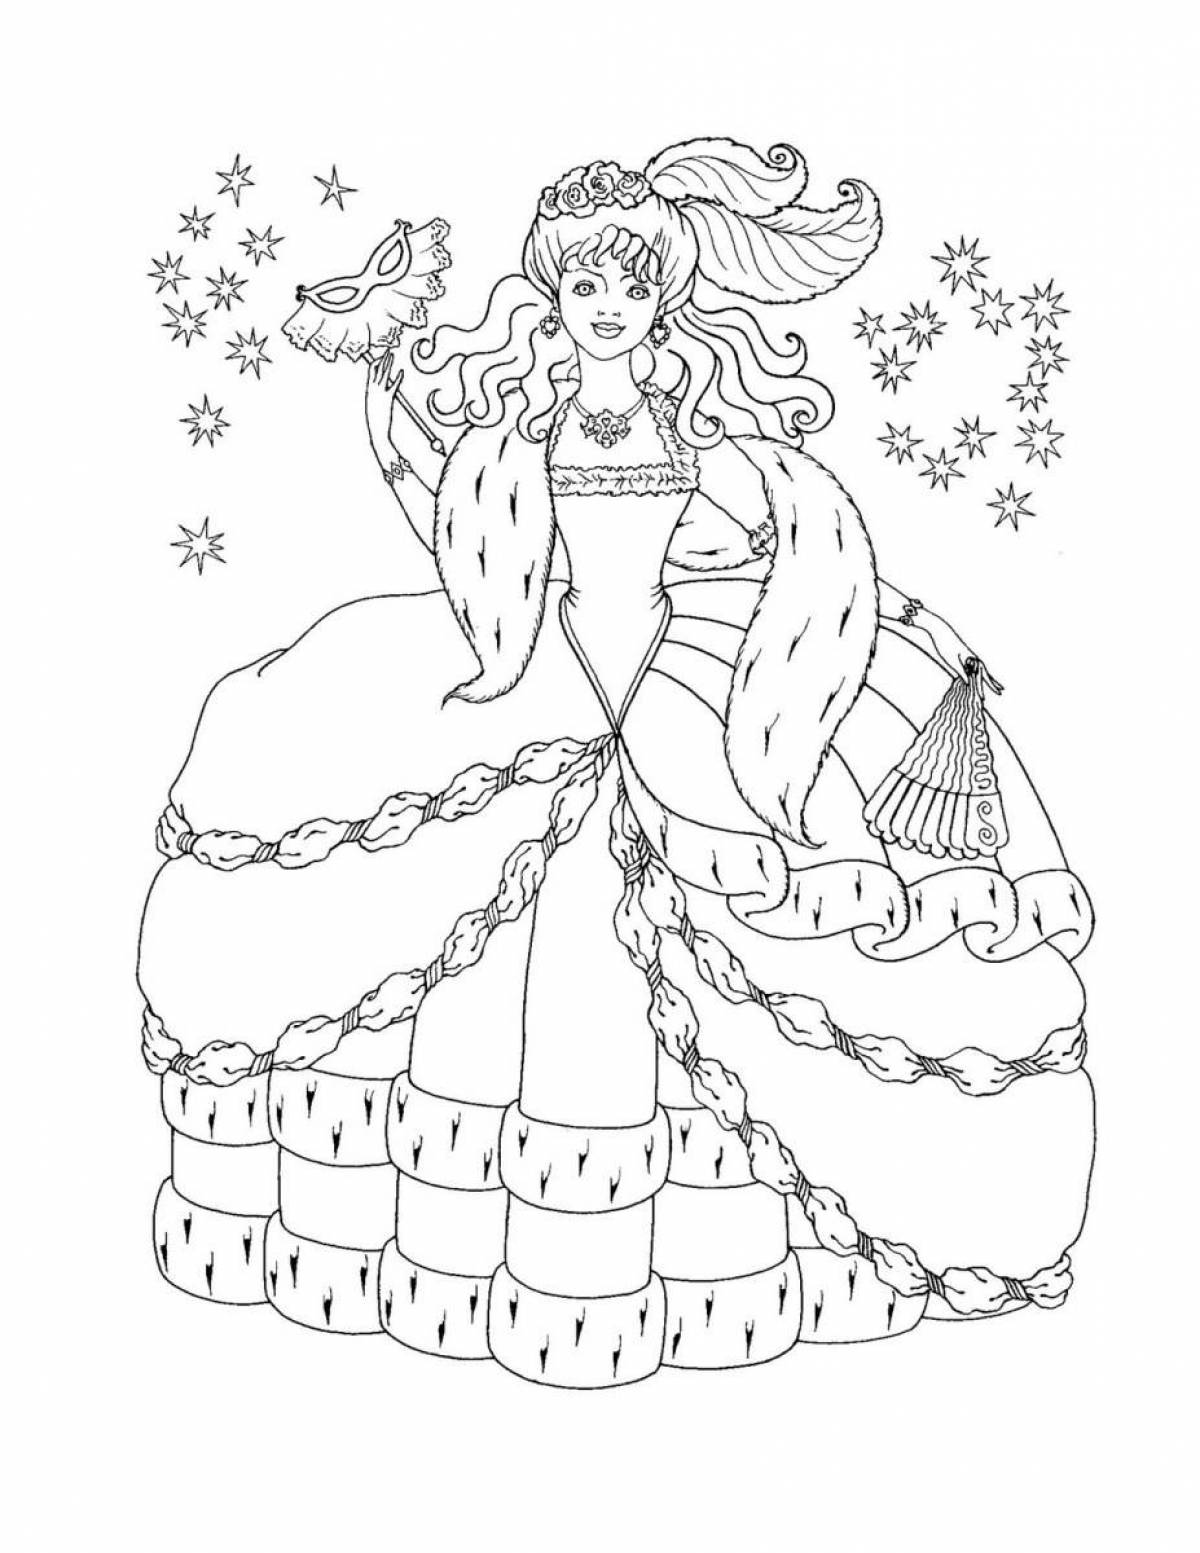 Princess holiday coloring pages for kids